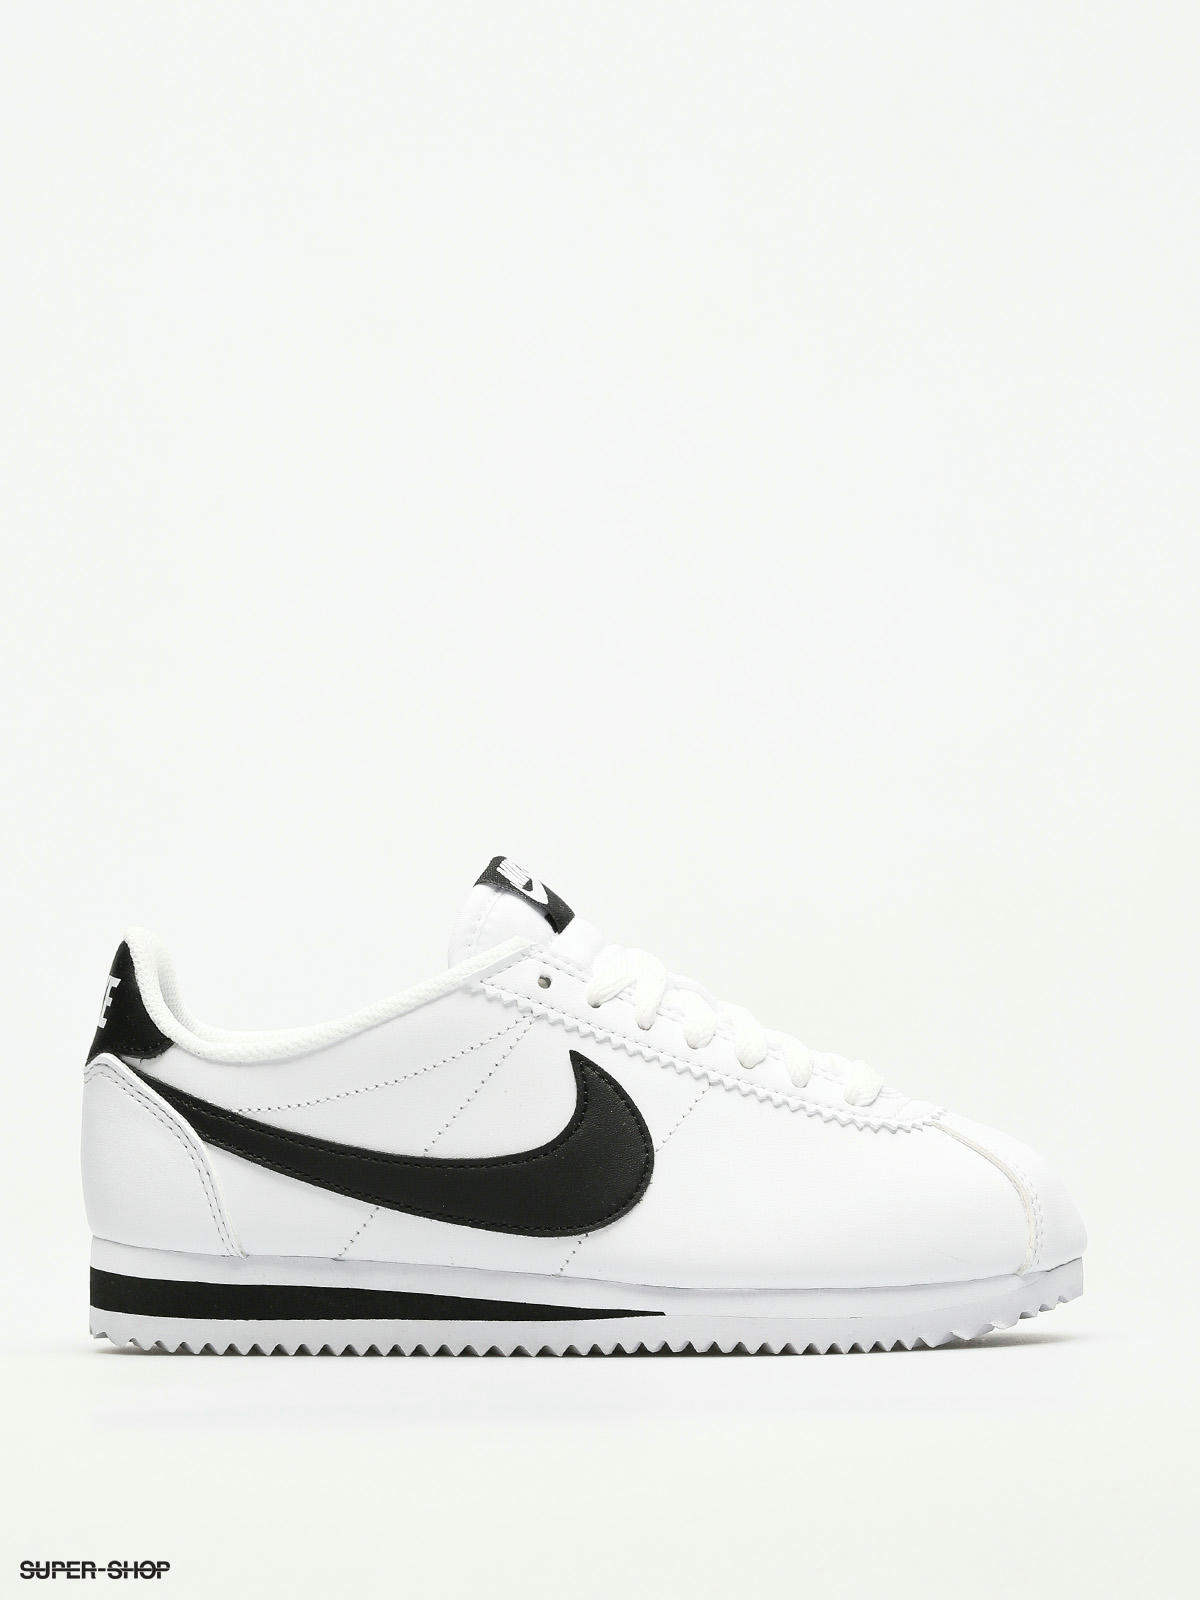 nike white and black classic cortez leather trainers